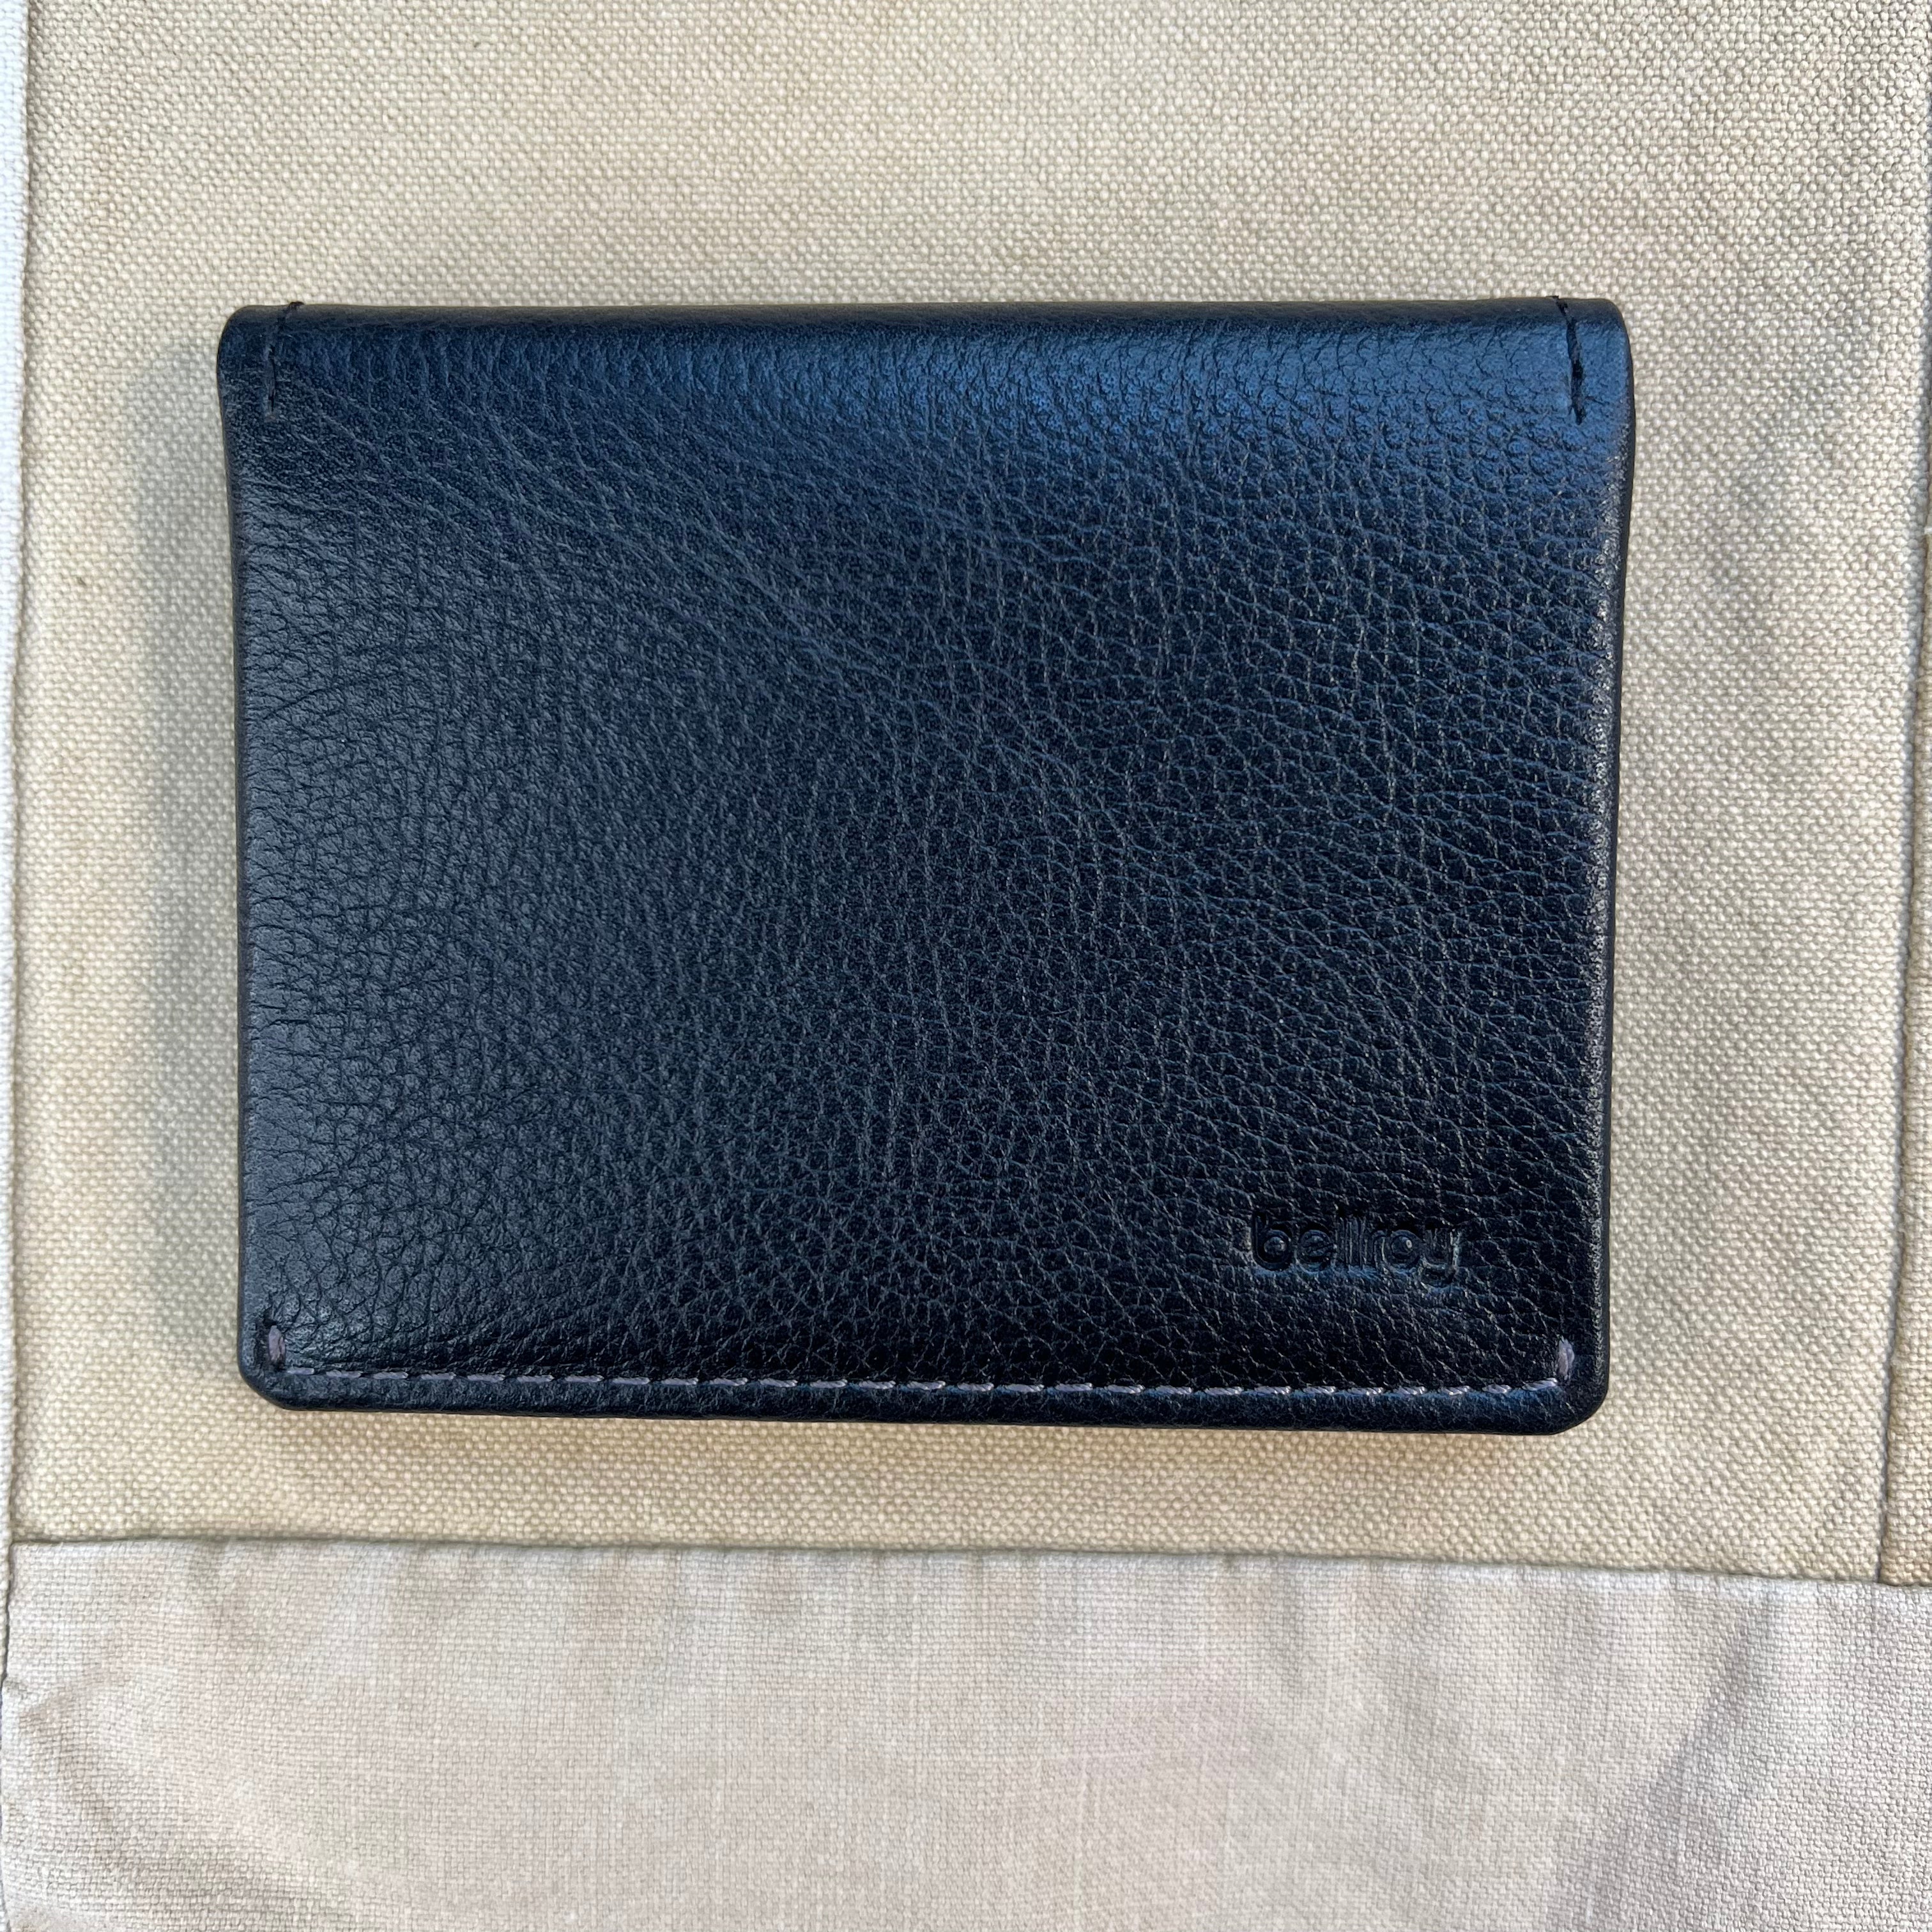 Bellroy Slim Sleeve Wallet - Available at Grounded